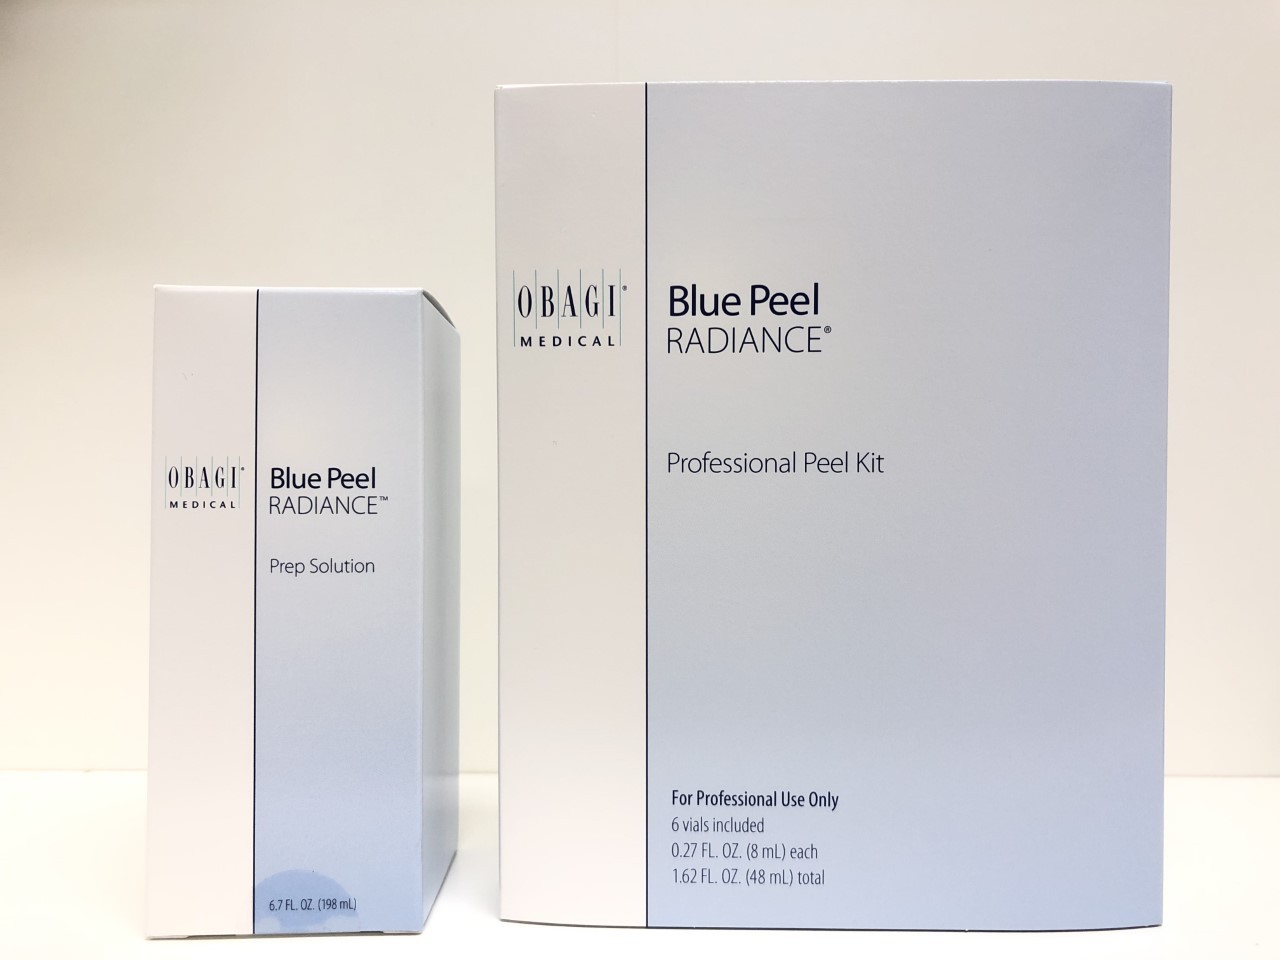 OBAGI RADIANCE KIT 6 Vials x 8ml each With Prep Solution 6.7 oz Brand New in Box - $240.00